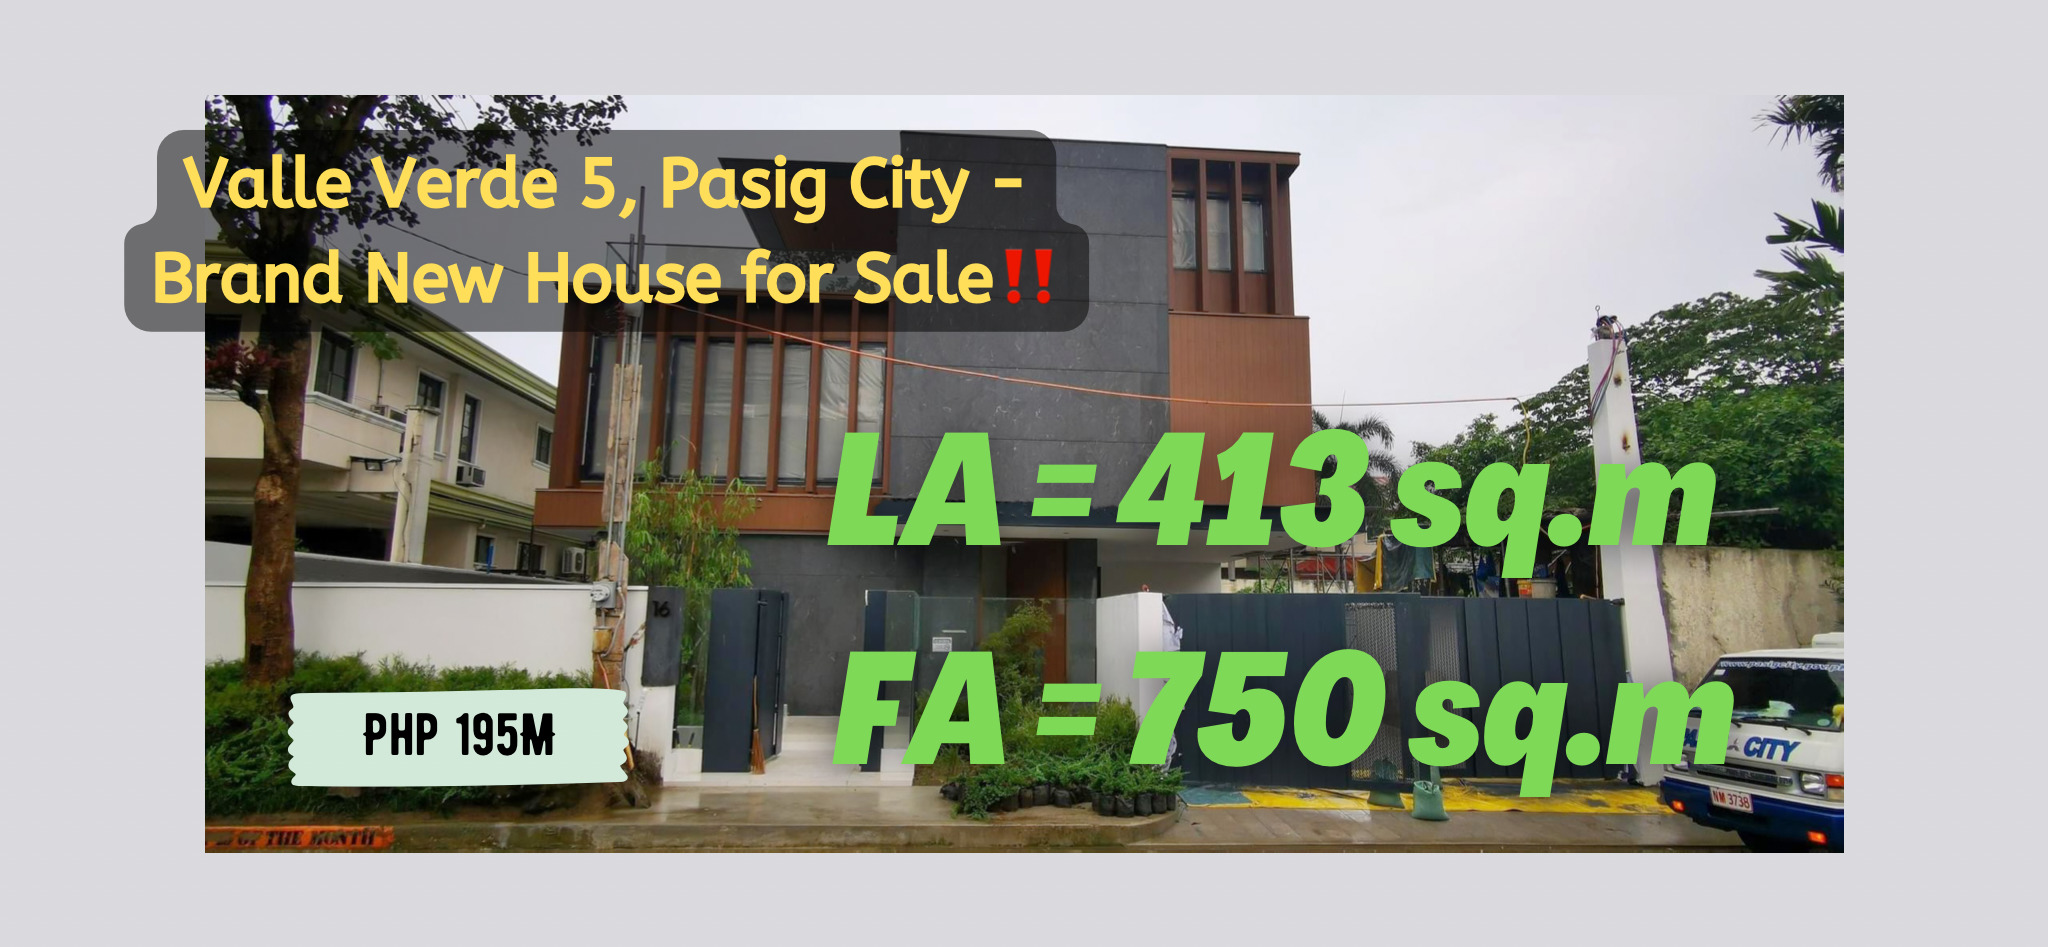 Valle Verde 5, Pasig City – Brand New House for Sale‼️